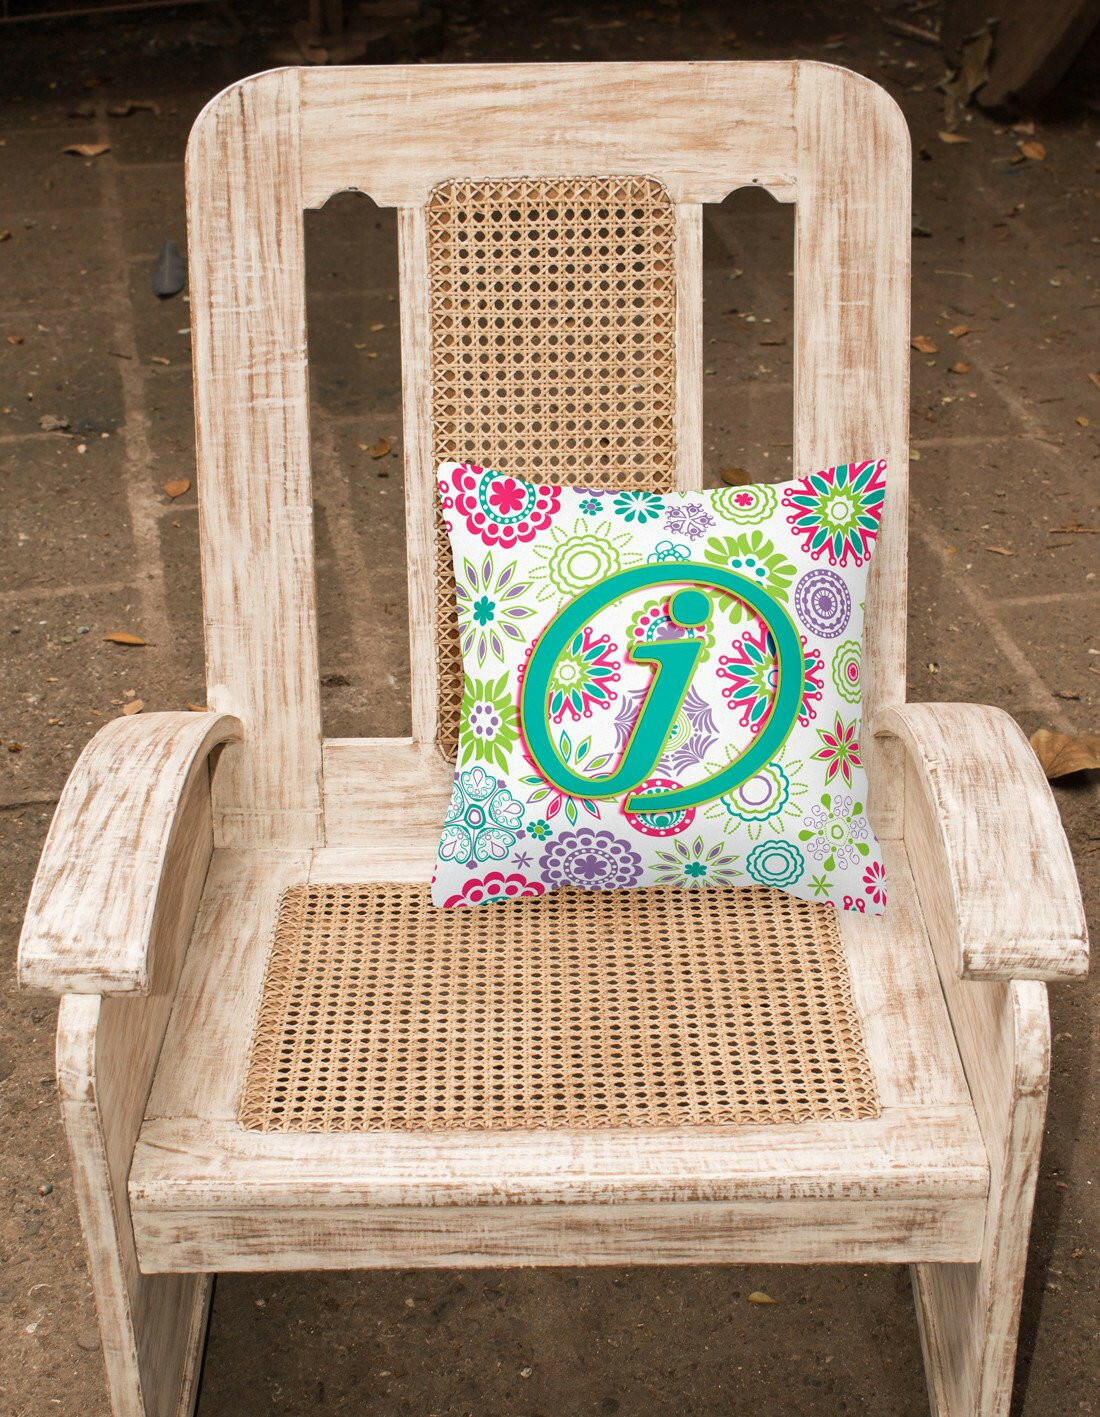 Letter J Flowers Pink Teal Green Initial Canvas Fabric Decorative Pillow CJ2011-JPW1414 by Caroline's Treasures